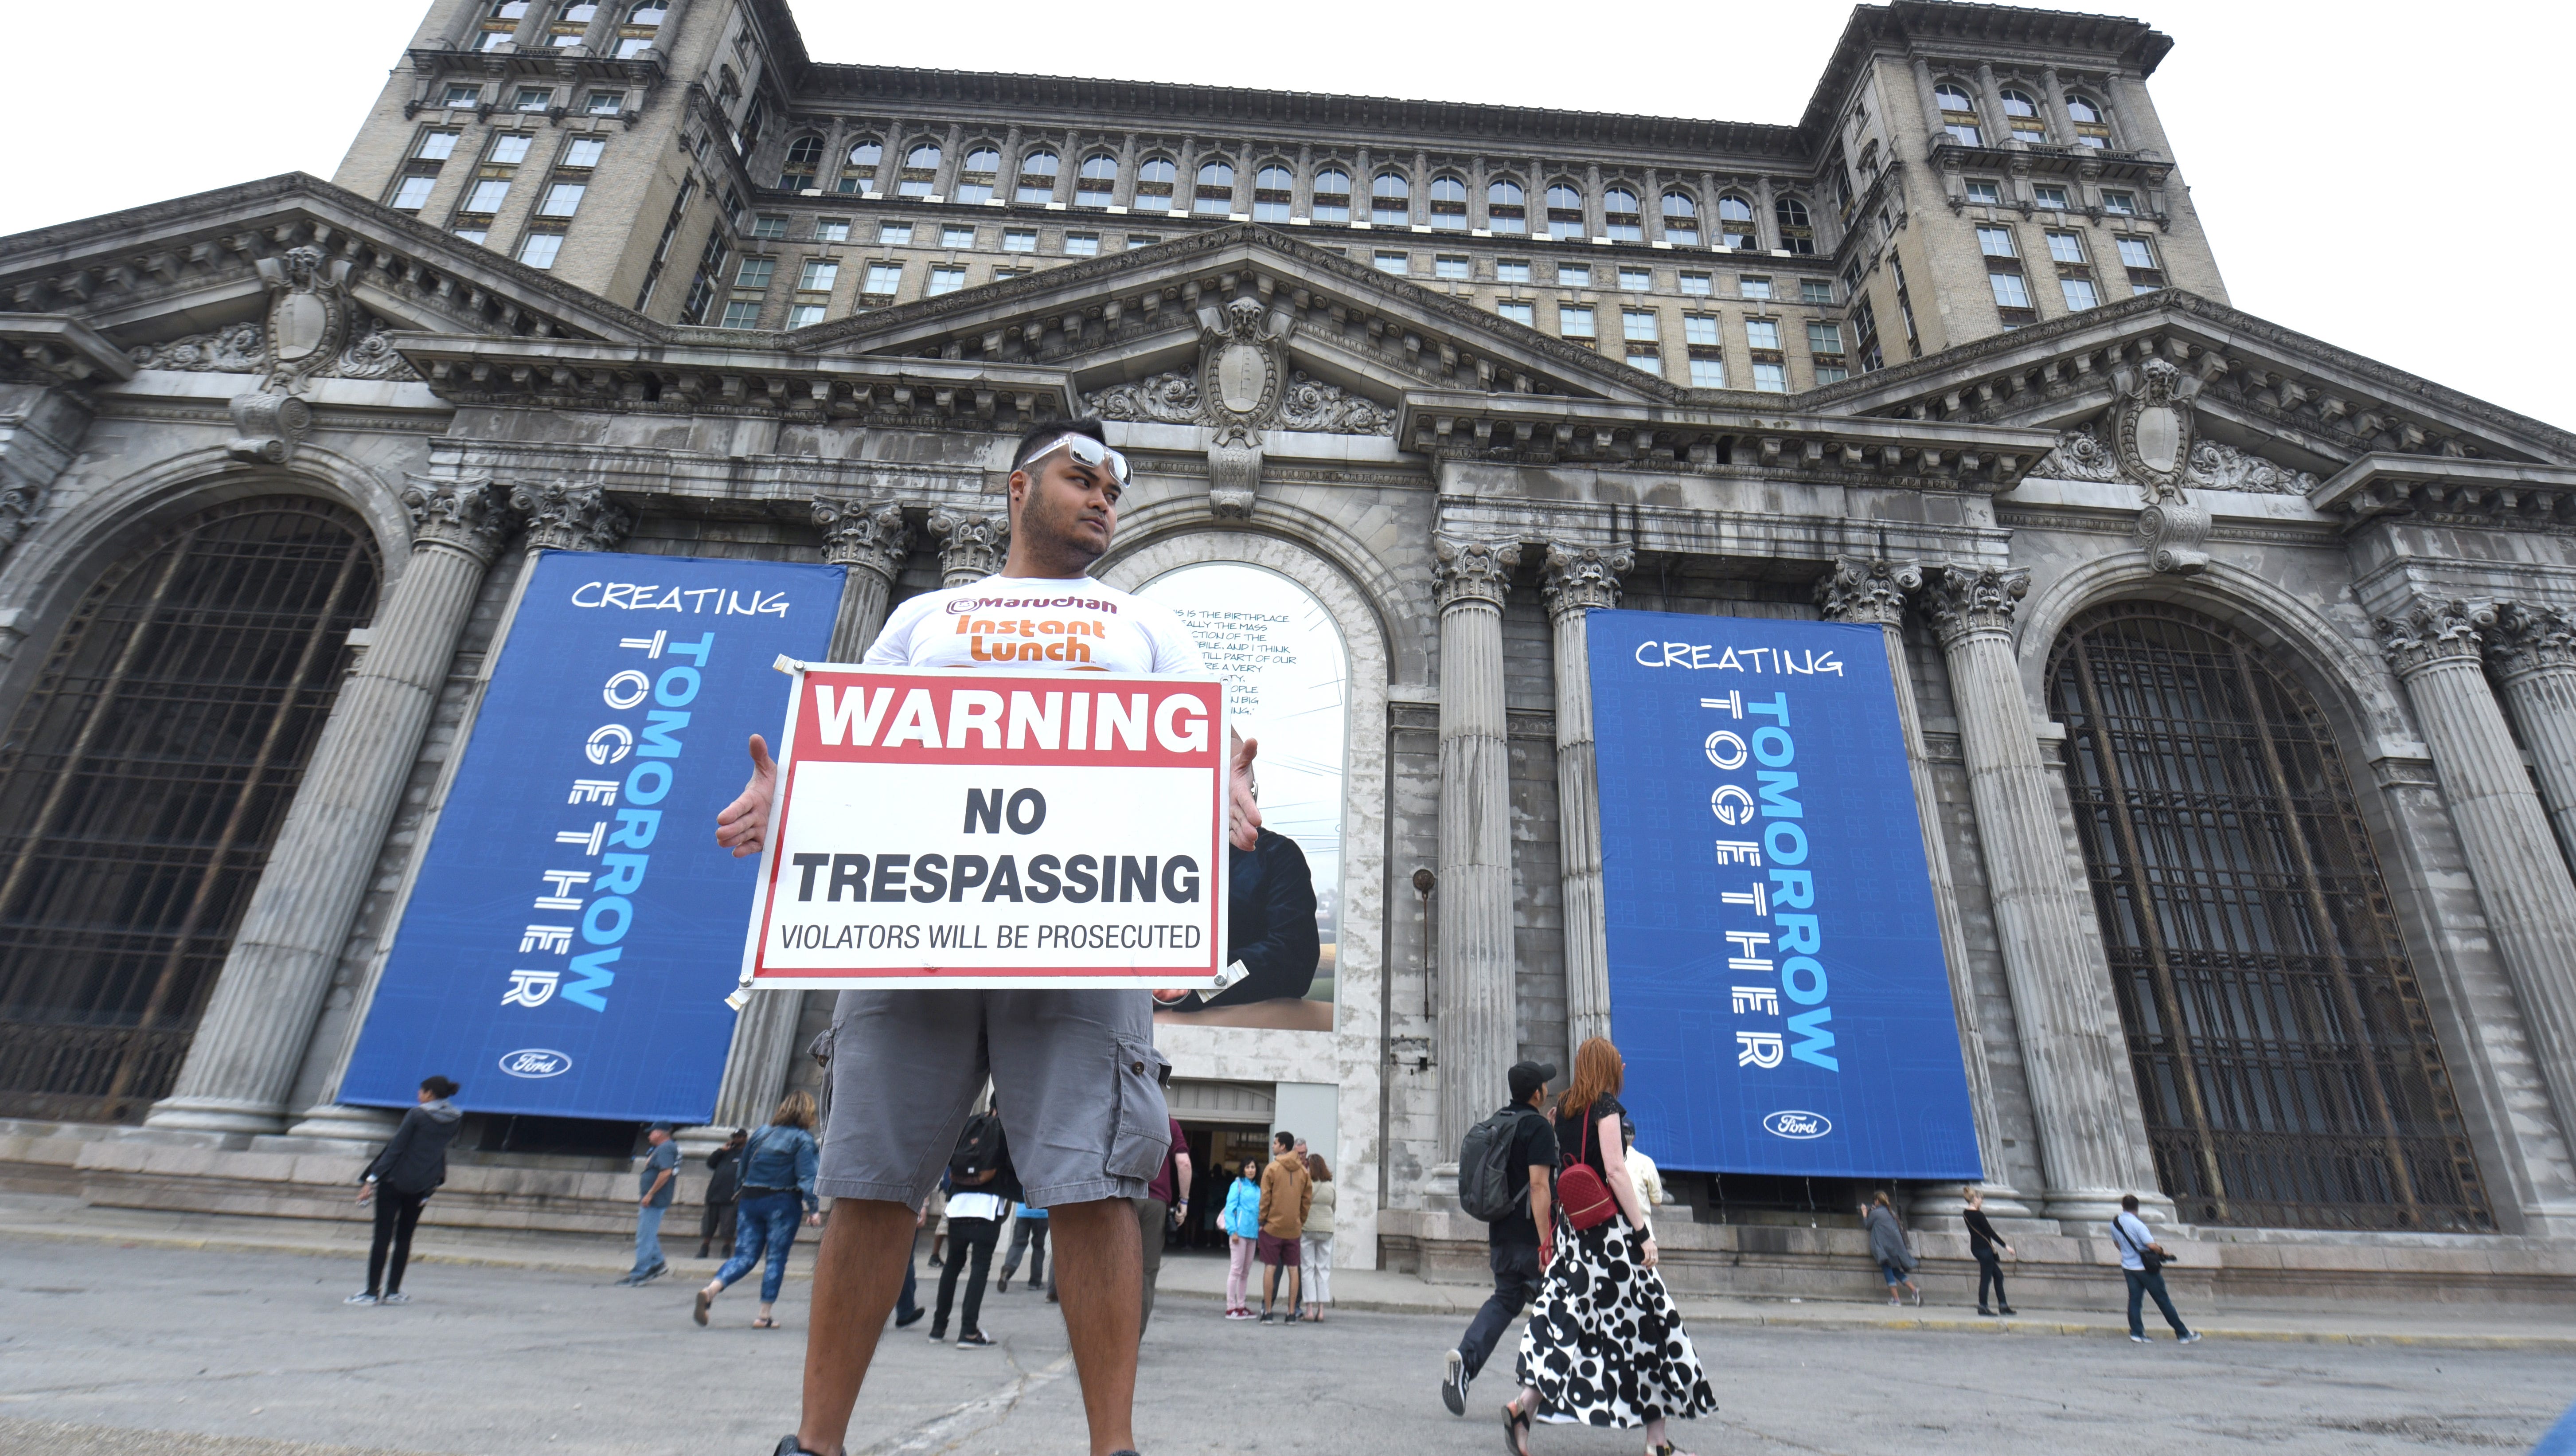 Francis Fiel of Dearborn holds a No Trespassing sign during an open house for the Michigan Central Train Depot on Friday June 22, 2018. Fiel remembers the many times he would explore the famed station despite such warnings to photograph the urban ruin.